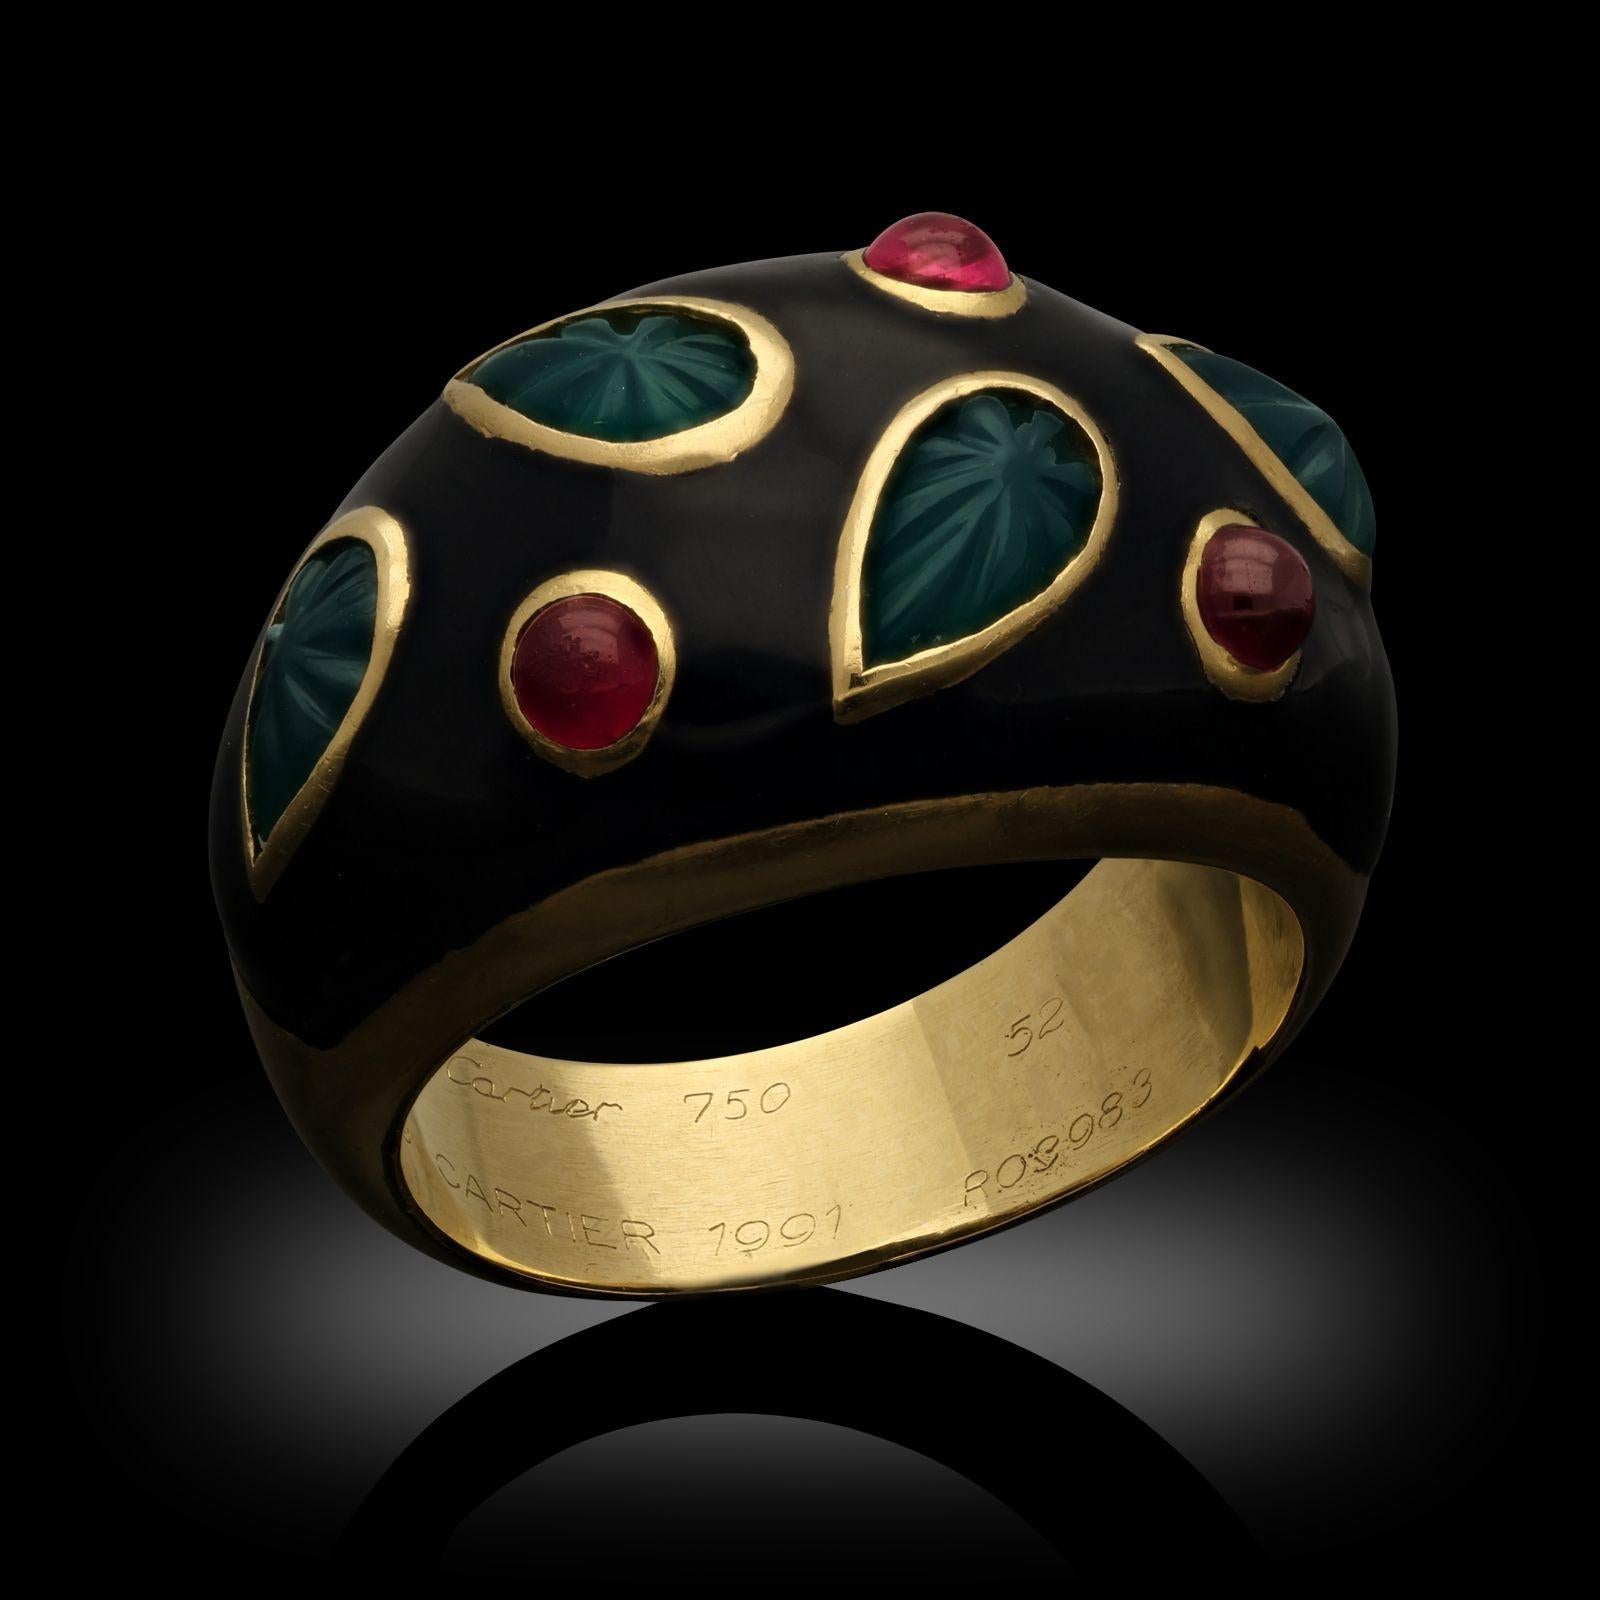 A vintage multi gem and black lacquer ring by Cartier. The ring is designed in a bombe shape set with carved chrysoprase leaves & round cabochon rubies all set in 18ct yellow gold with a black lacquer finish to the top, the gold band tapers to the